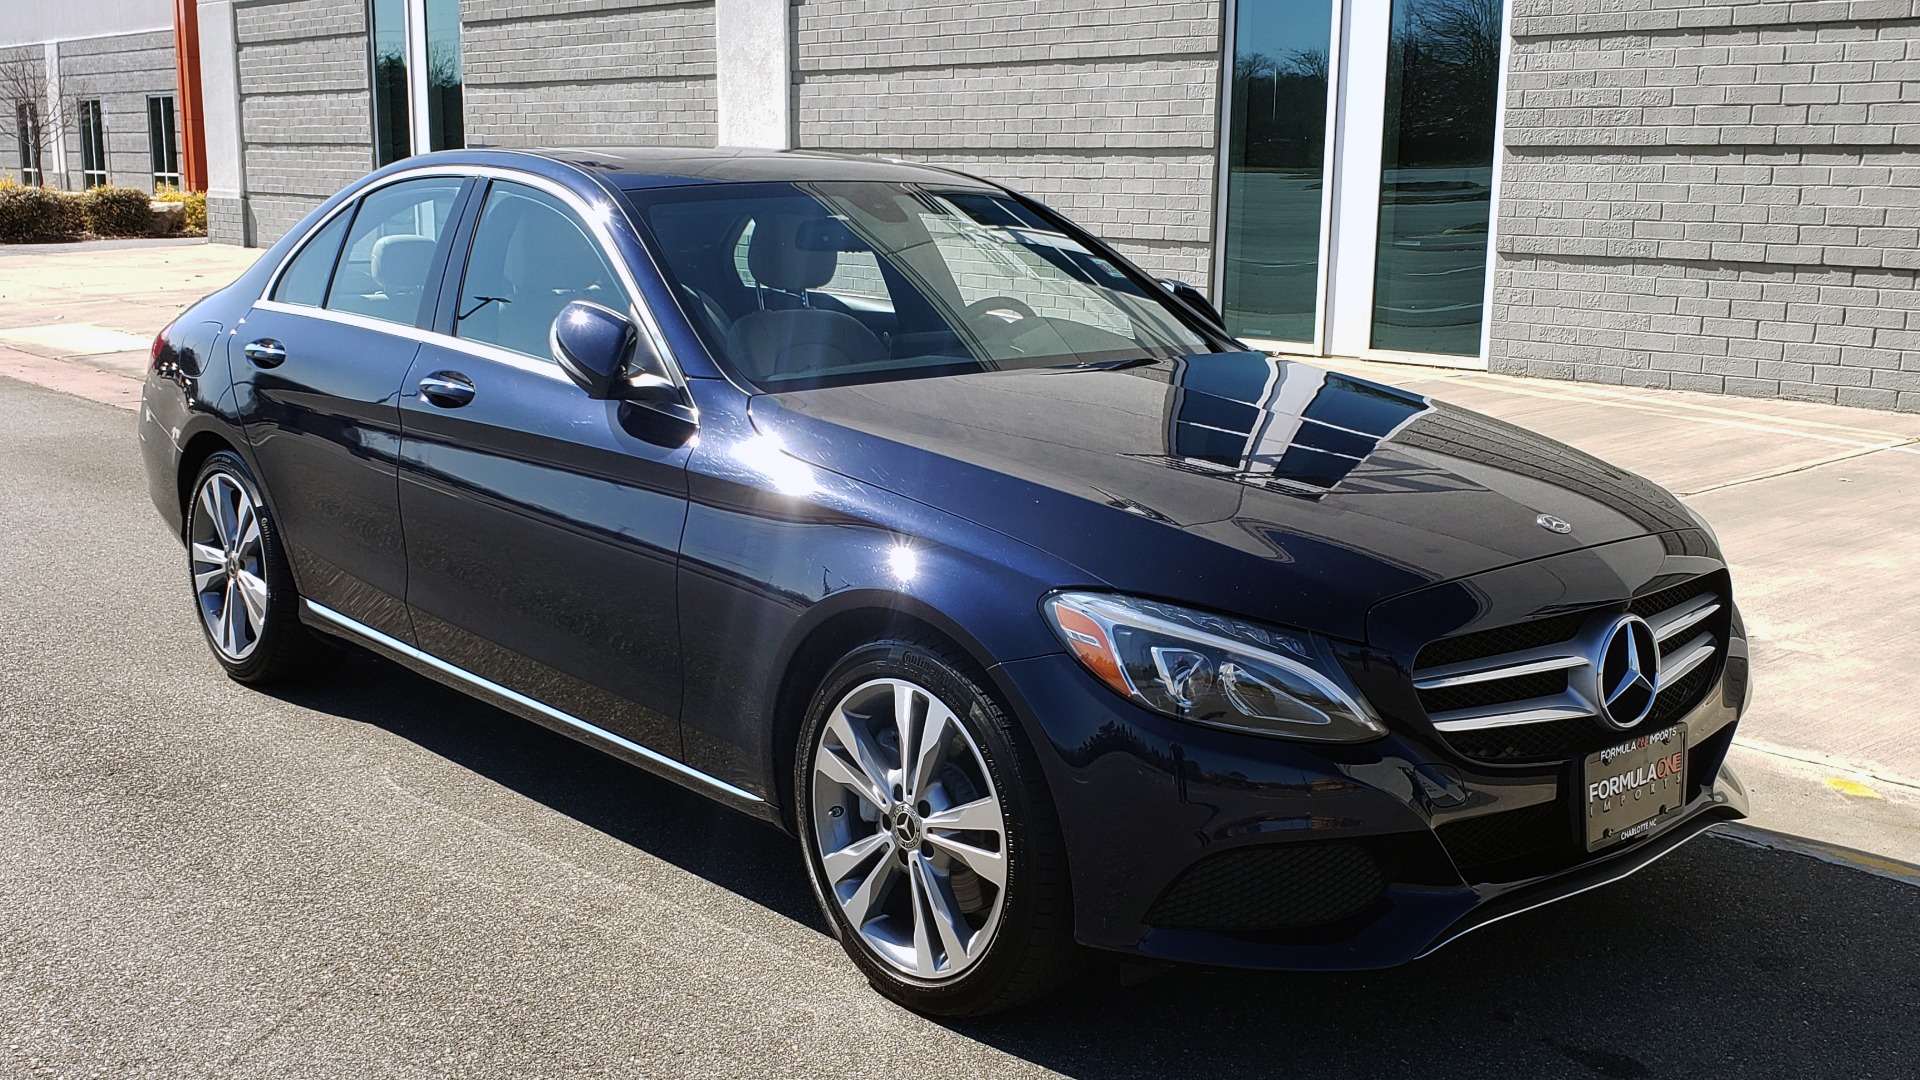 Used 2018 Mercedes-Benz C-CLASS C 300 PREMIUM / SUNROOF / BURMESTER / BSM / REARVIEW for sale Sold at Formula Imports in Charlotte NC 28227 5